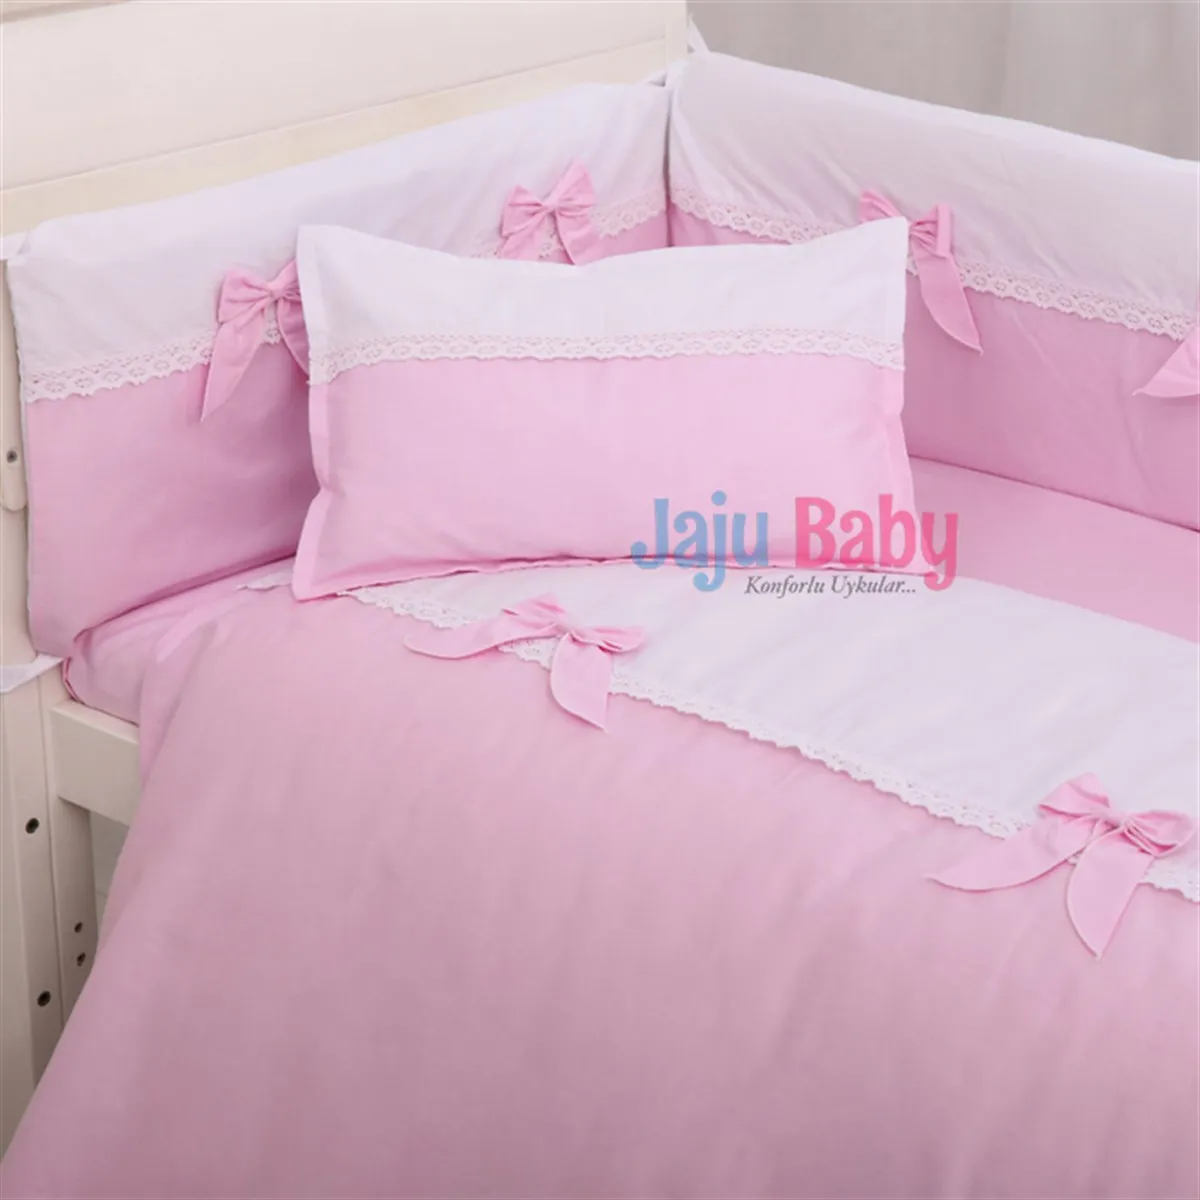 Jaju Baby Handmade, Pink White Baby Duvet Cover Set and Edge Protection, Baby Duvet Cover, Baby sheet, Baby Barrier Set